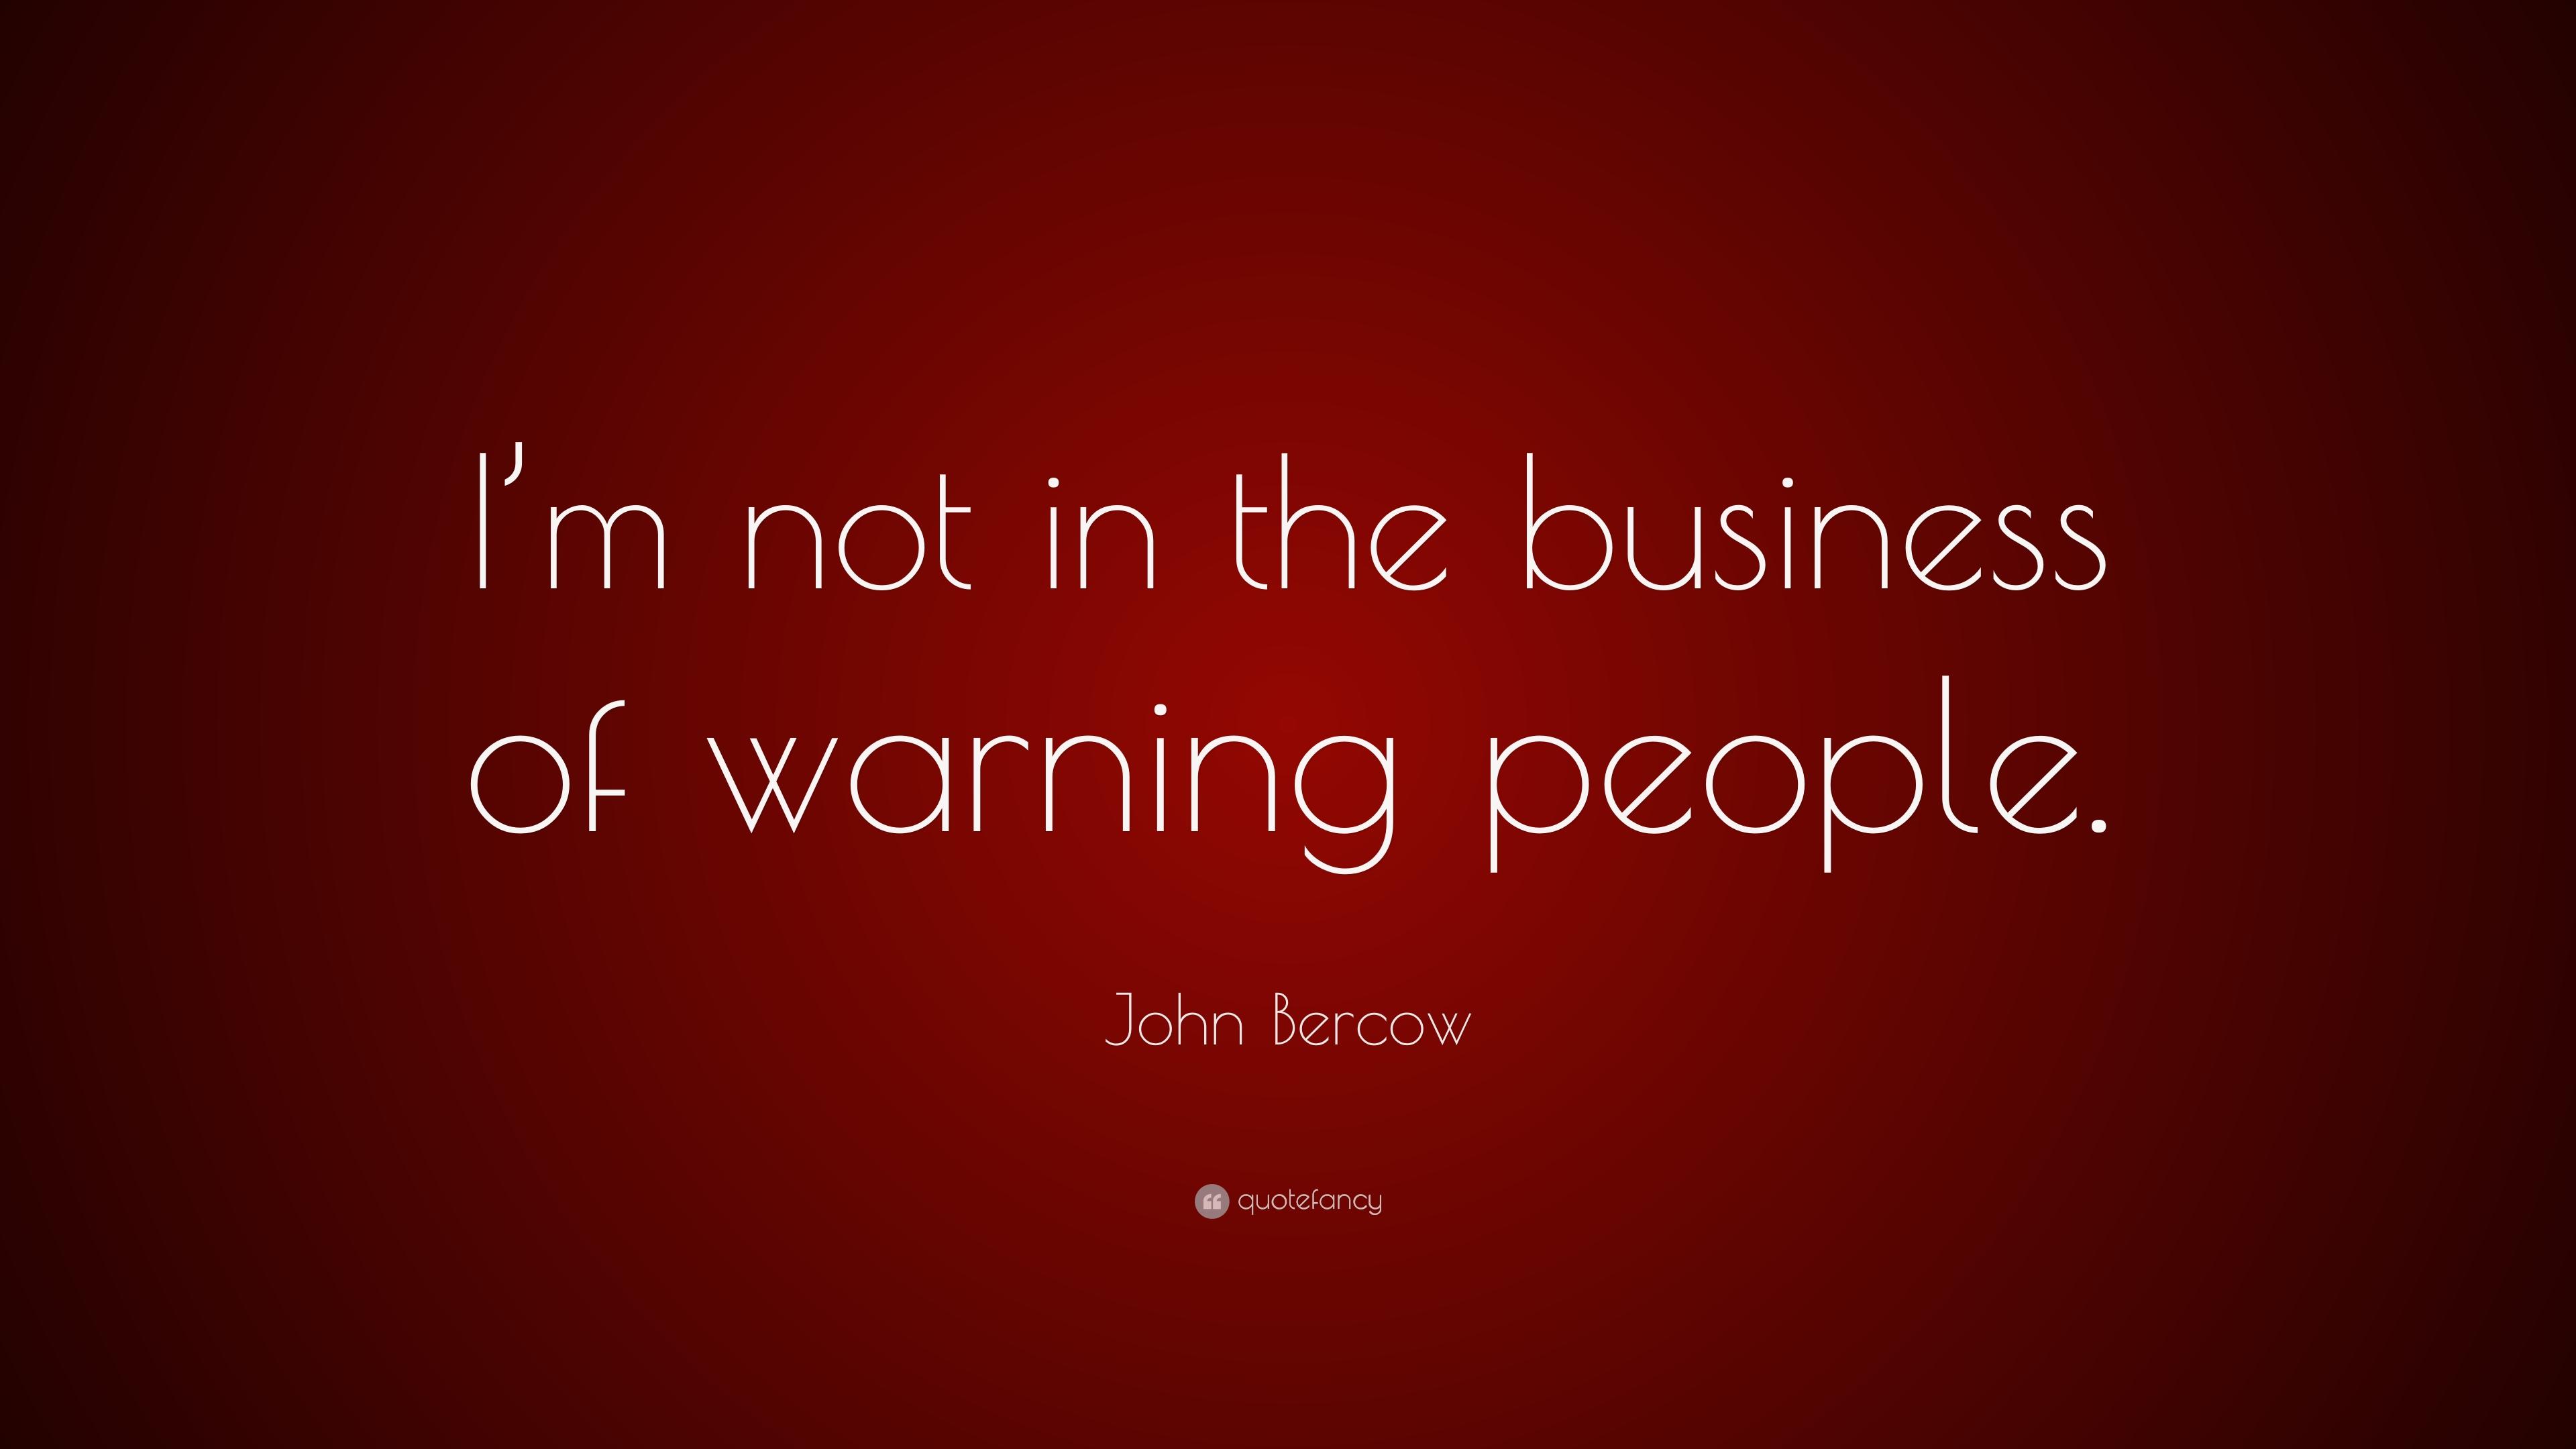 John Bercow Quote: “I'm not in the business of warning people.”